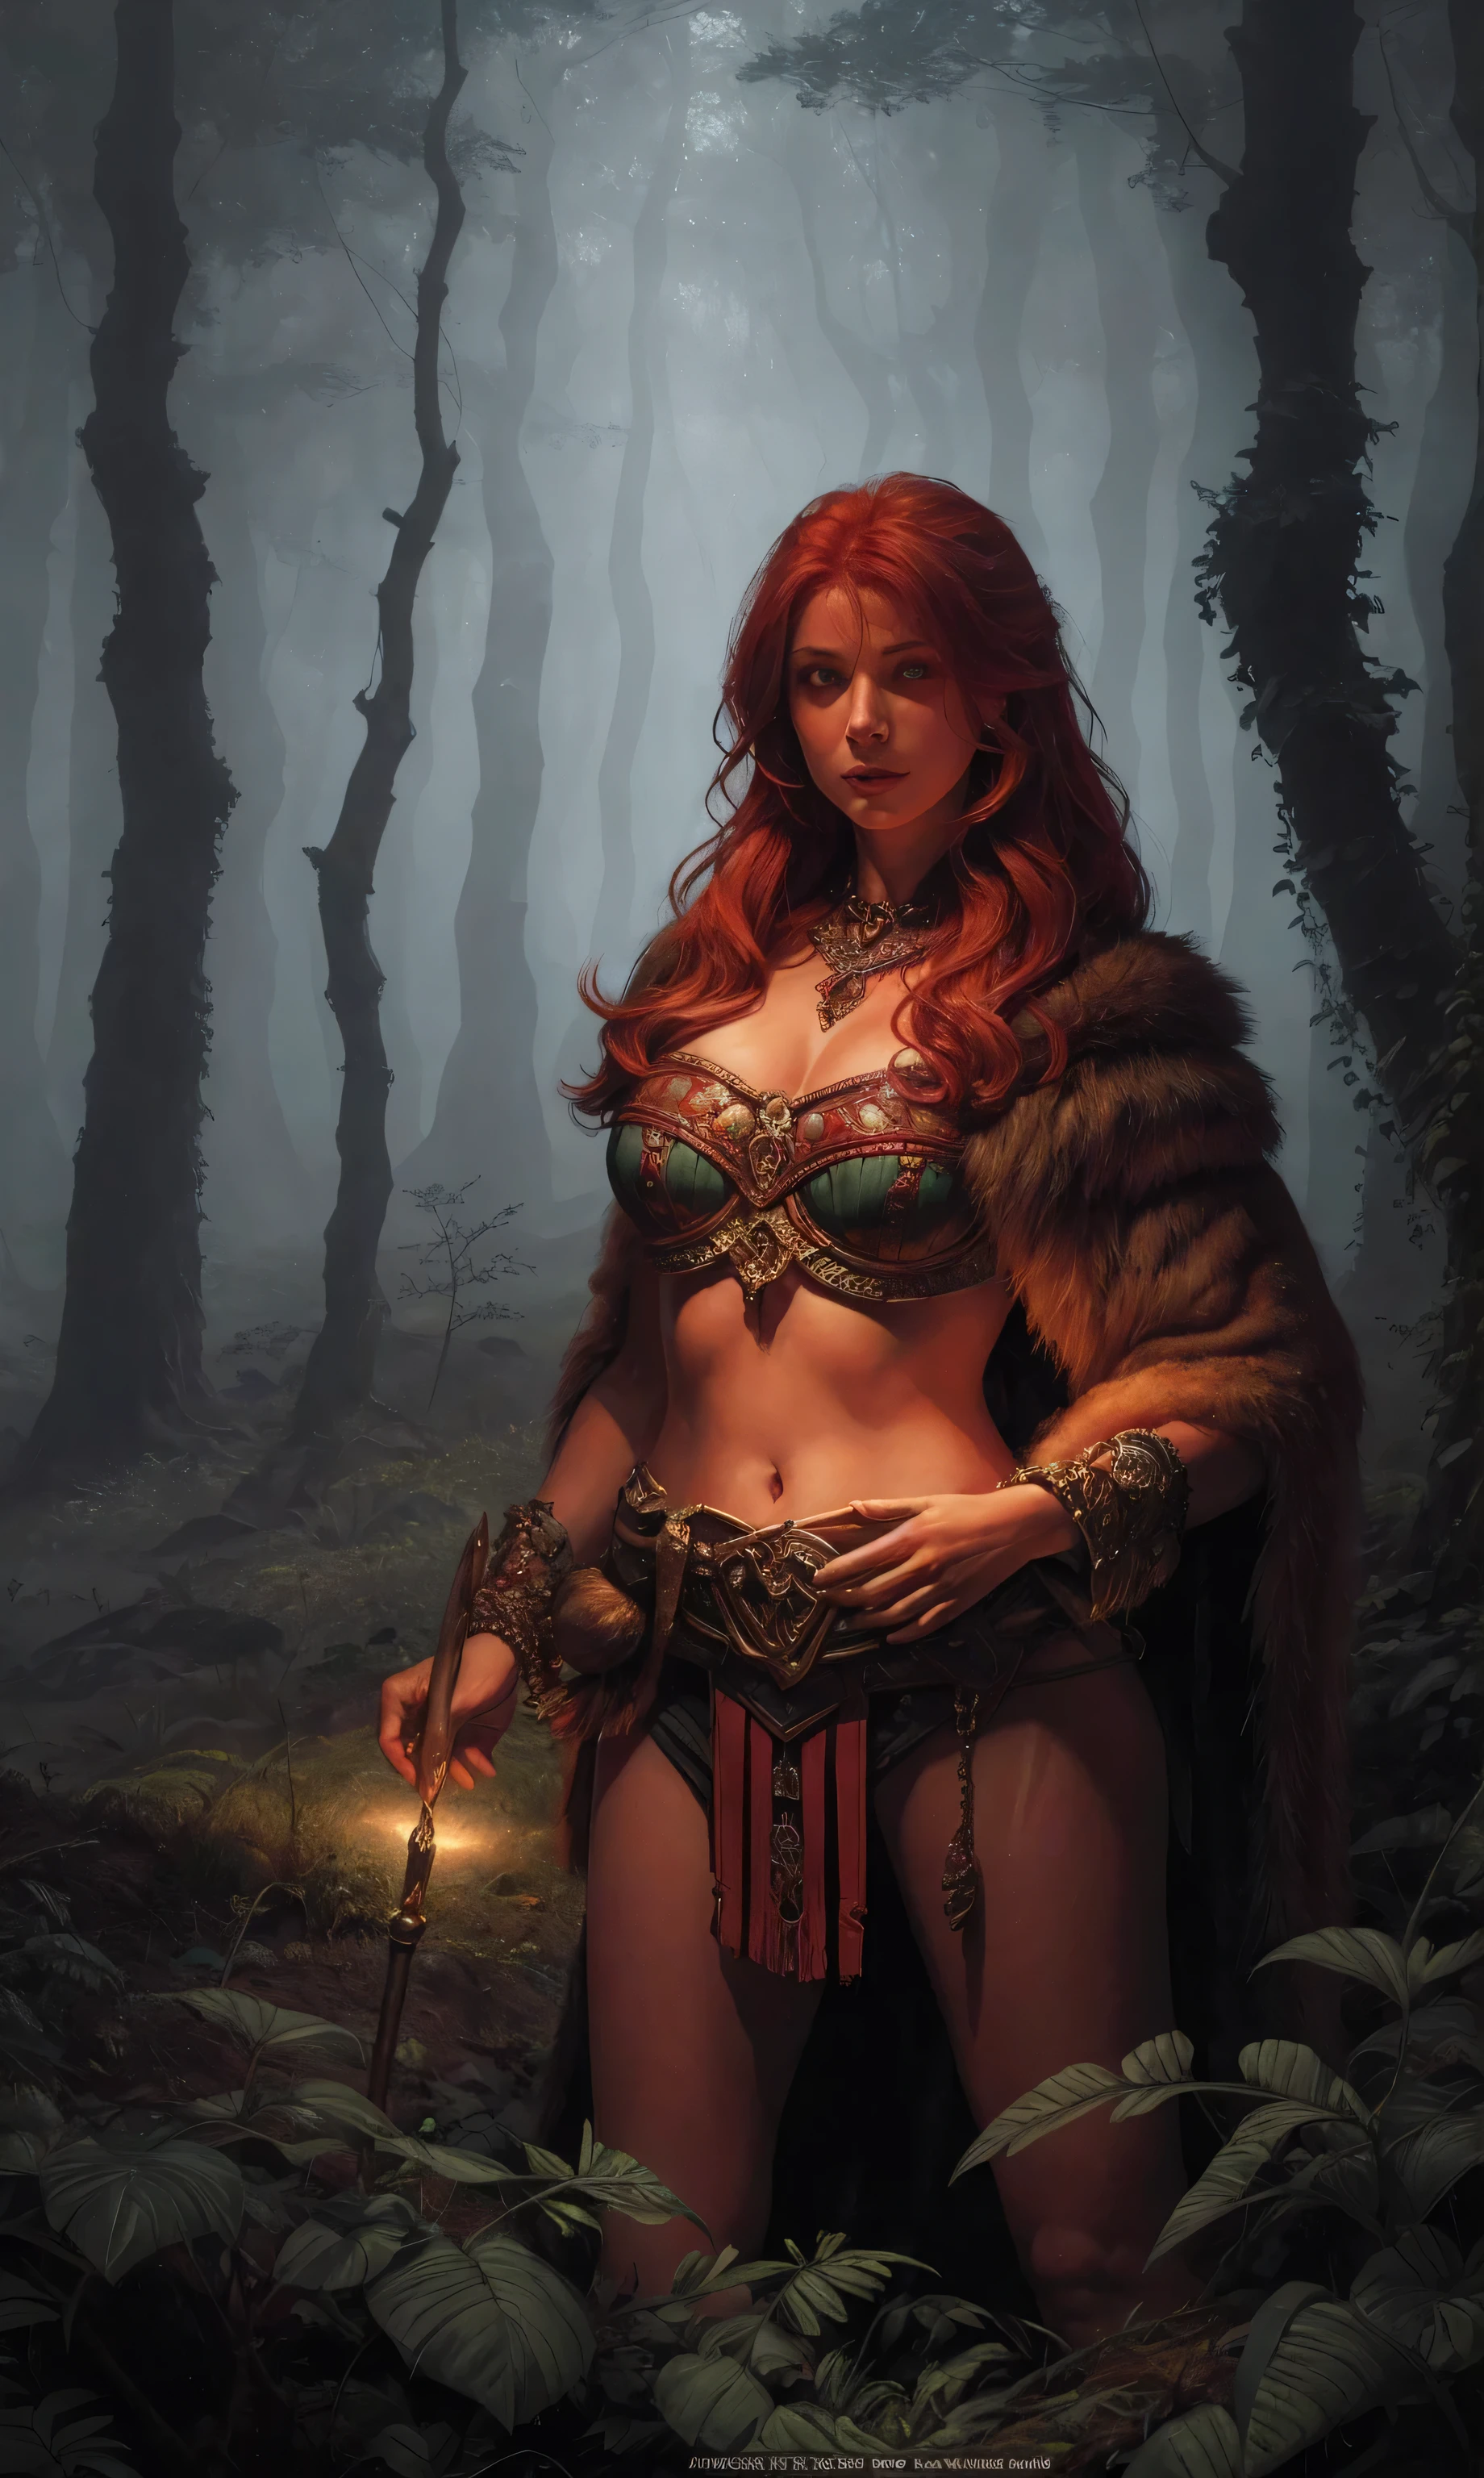 advdnd2023, novel illustration, intricate art, 1girl, female, a woman, redhead, wearing a bear skin, positioned in a dense forest, glowing red eyes, detailed painting style, mysterious atmosphere,realistic light and shadows, painting, open field